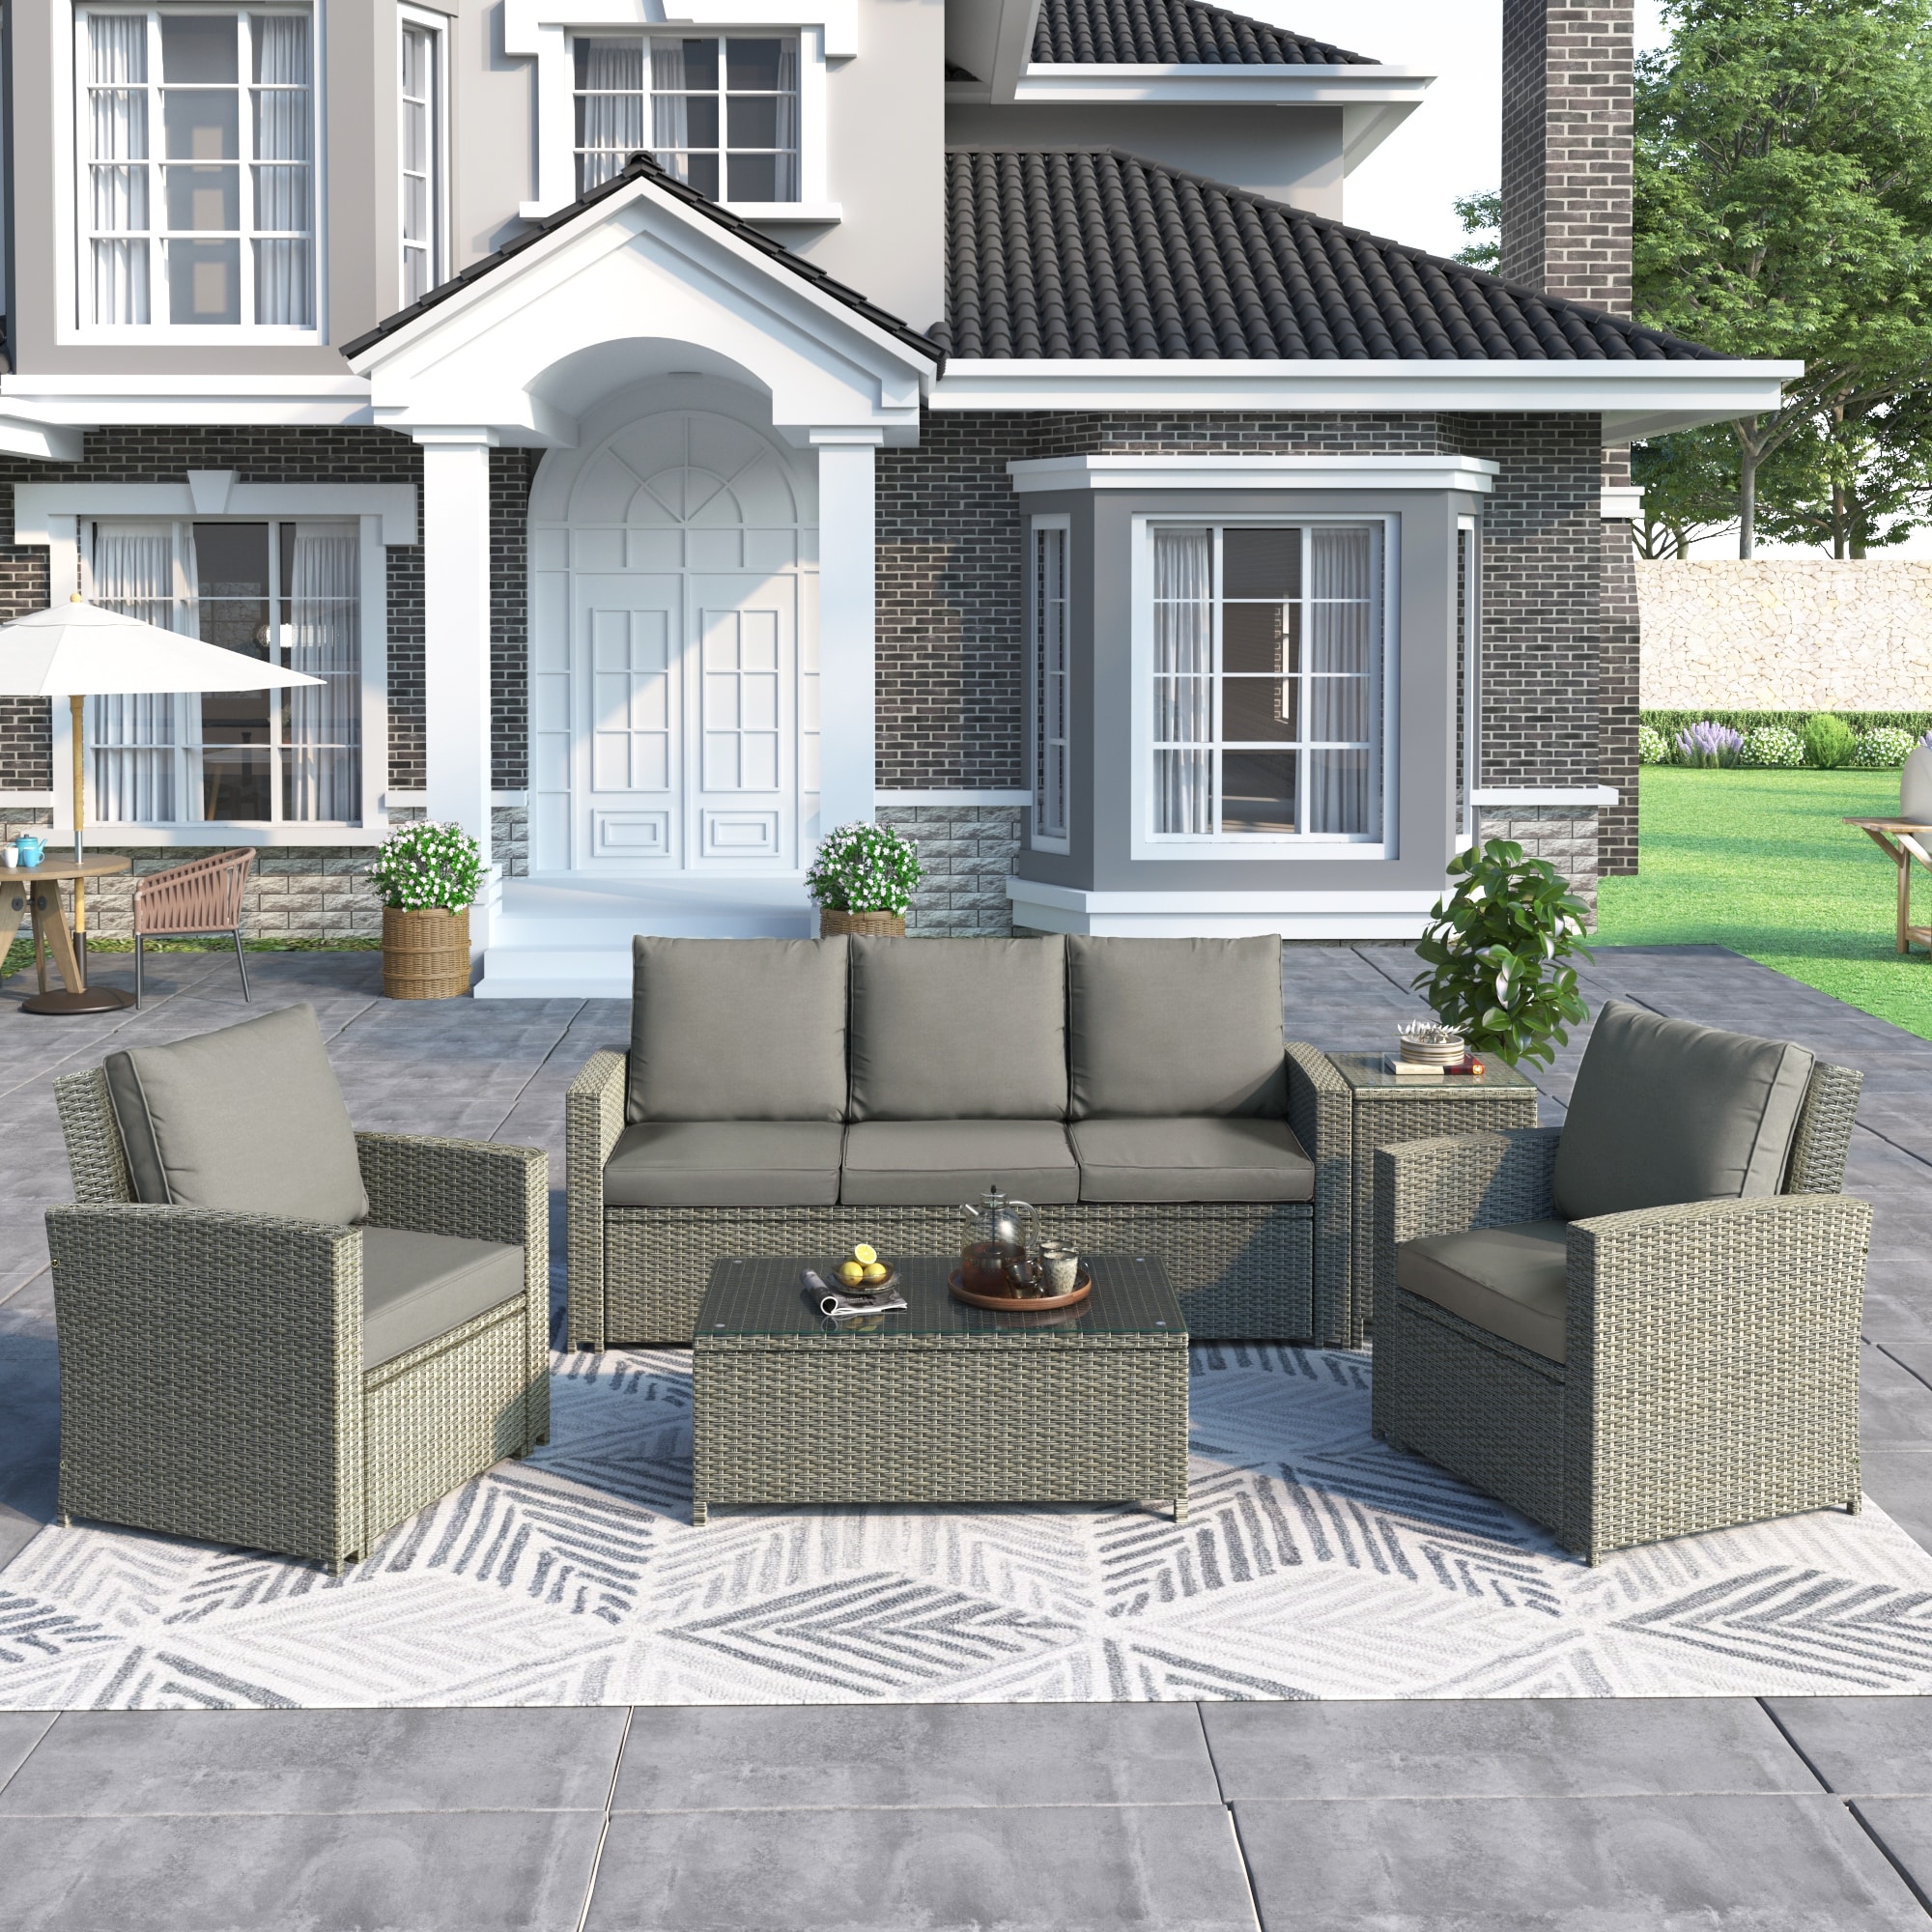 5 Piece Rattan Sectional Seating Group With Patio Outdoor Three Seat Sofa and Arm Chairs Sets